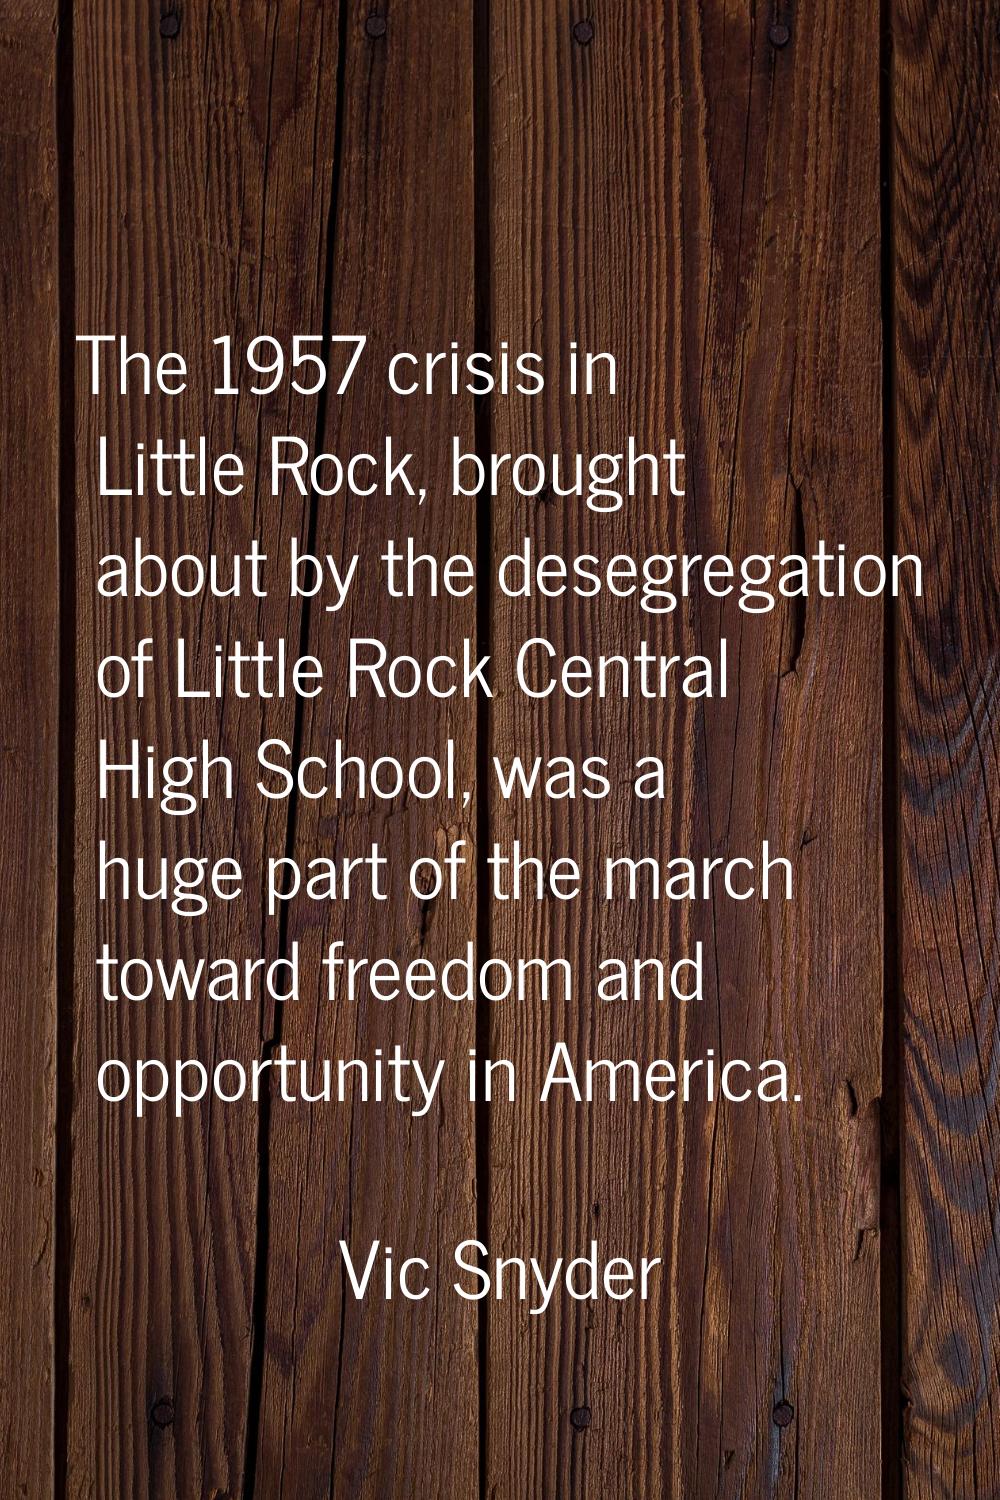 The 1957 crisis in Little Rock, brought about by the desegregation of Little Rock Central High Scho